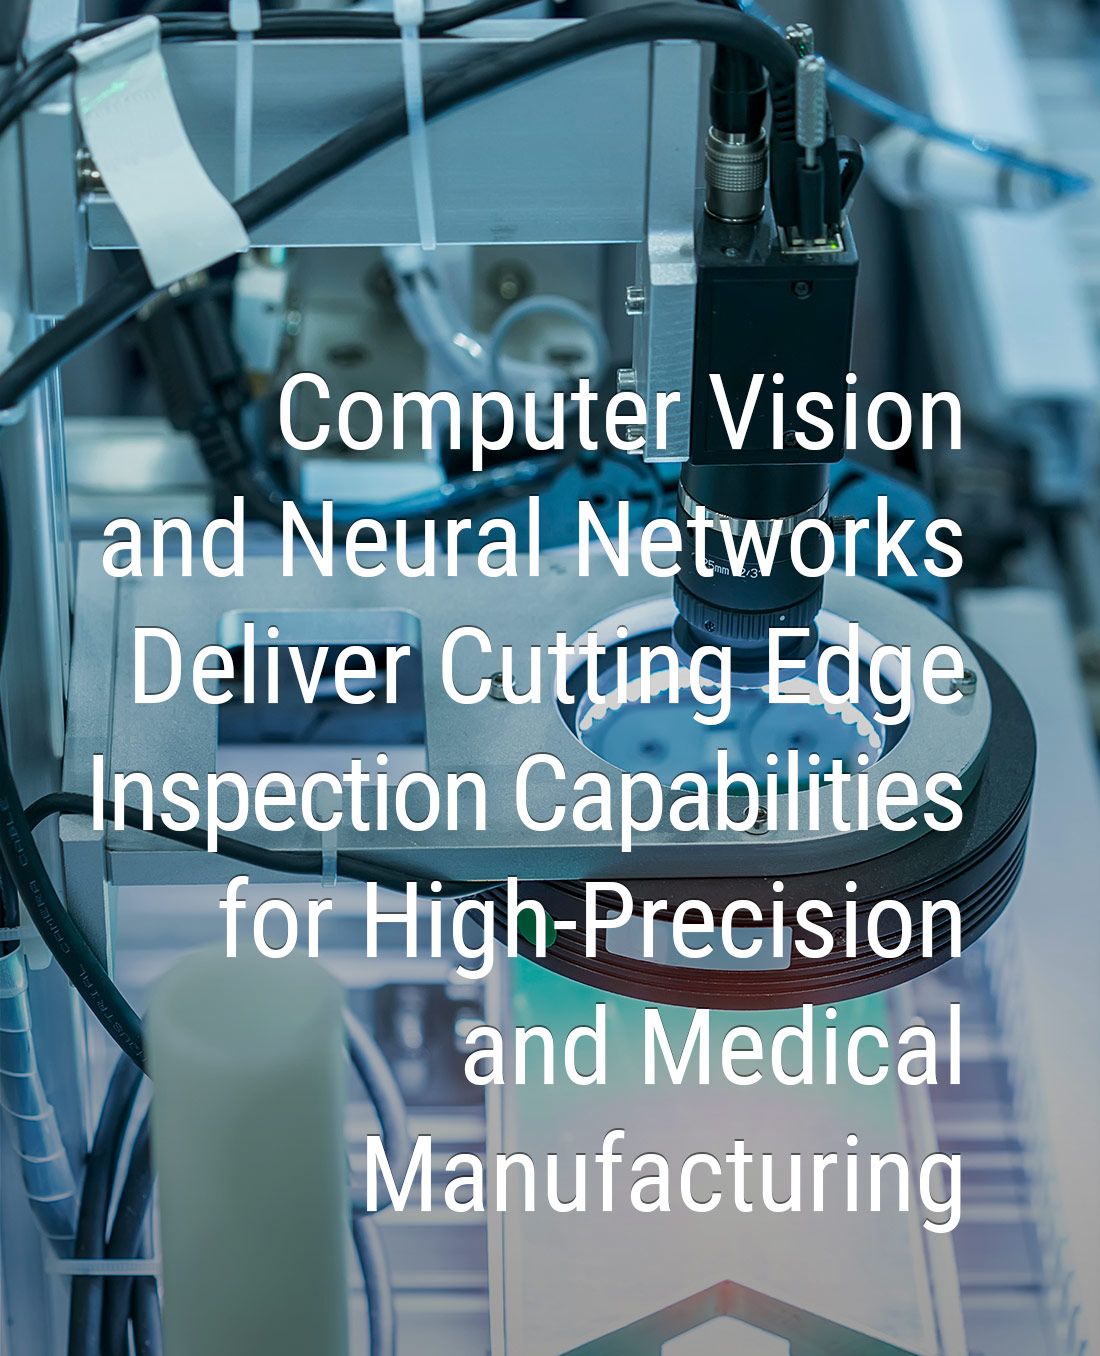 Computer Vision and Neural Networks deliver Cutting Edge Inspection capabilities for High-precision and Medical manufacturing